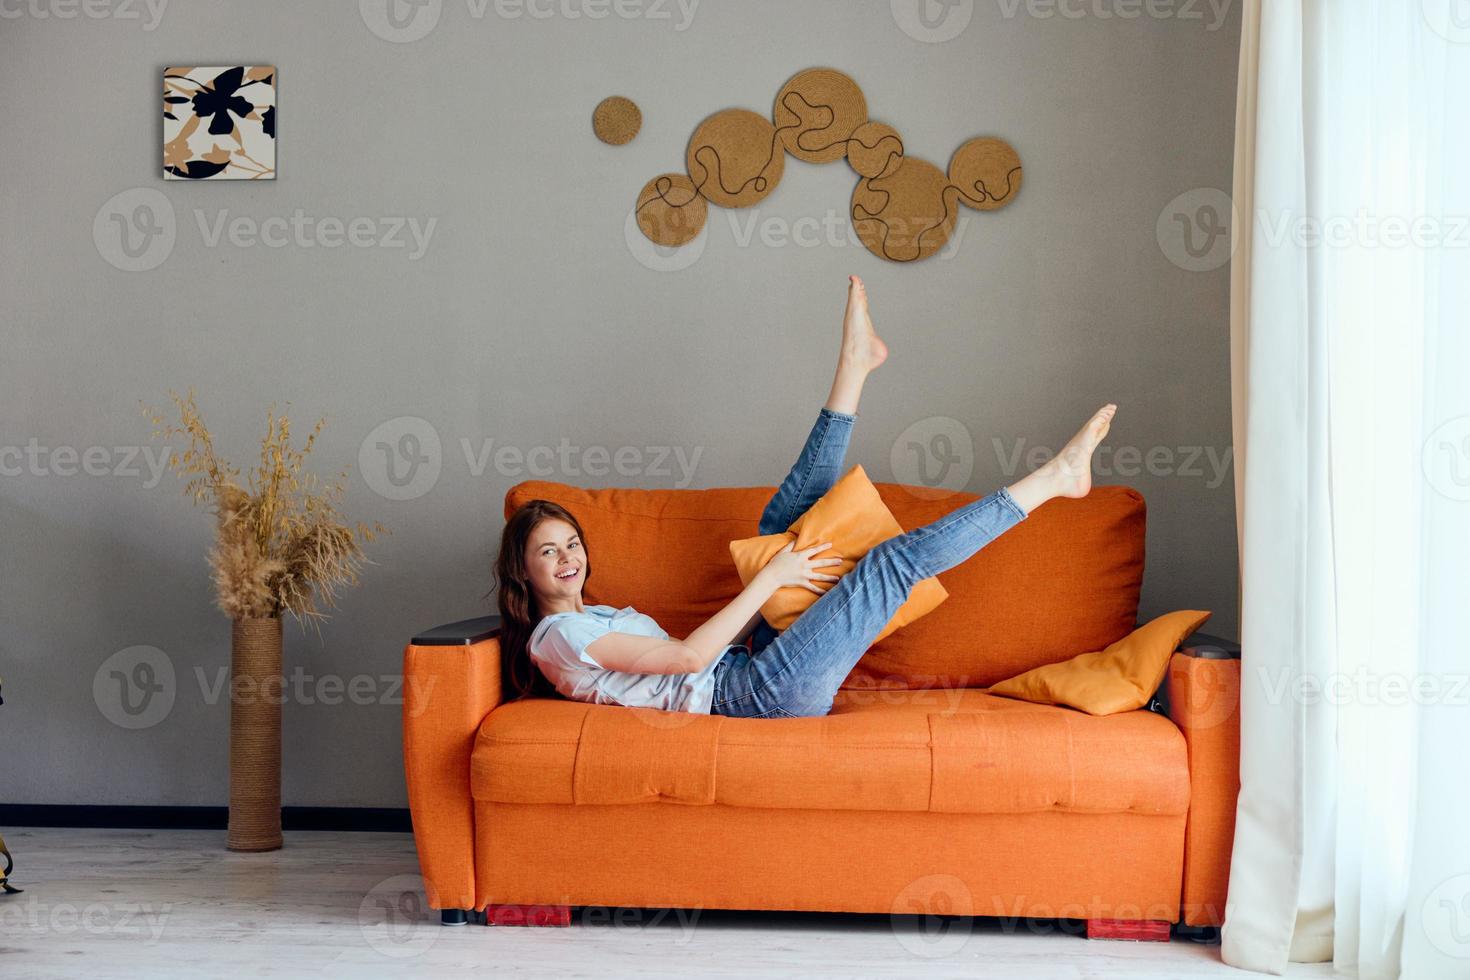 beautiful woman on the orange couch in the rest room posing Lifestyle photo